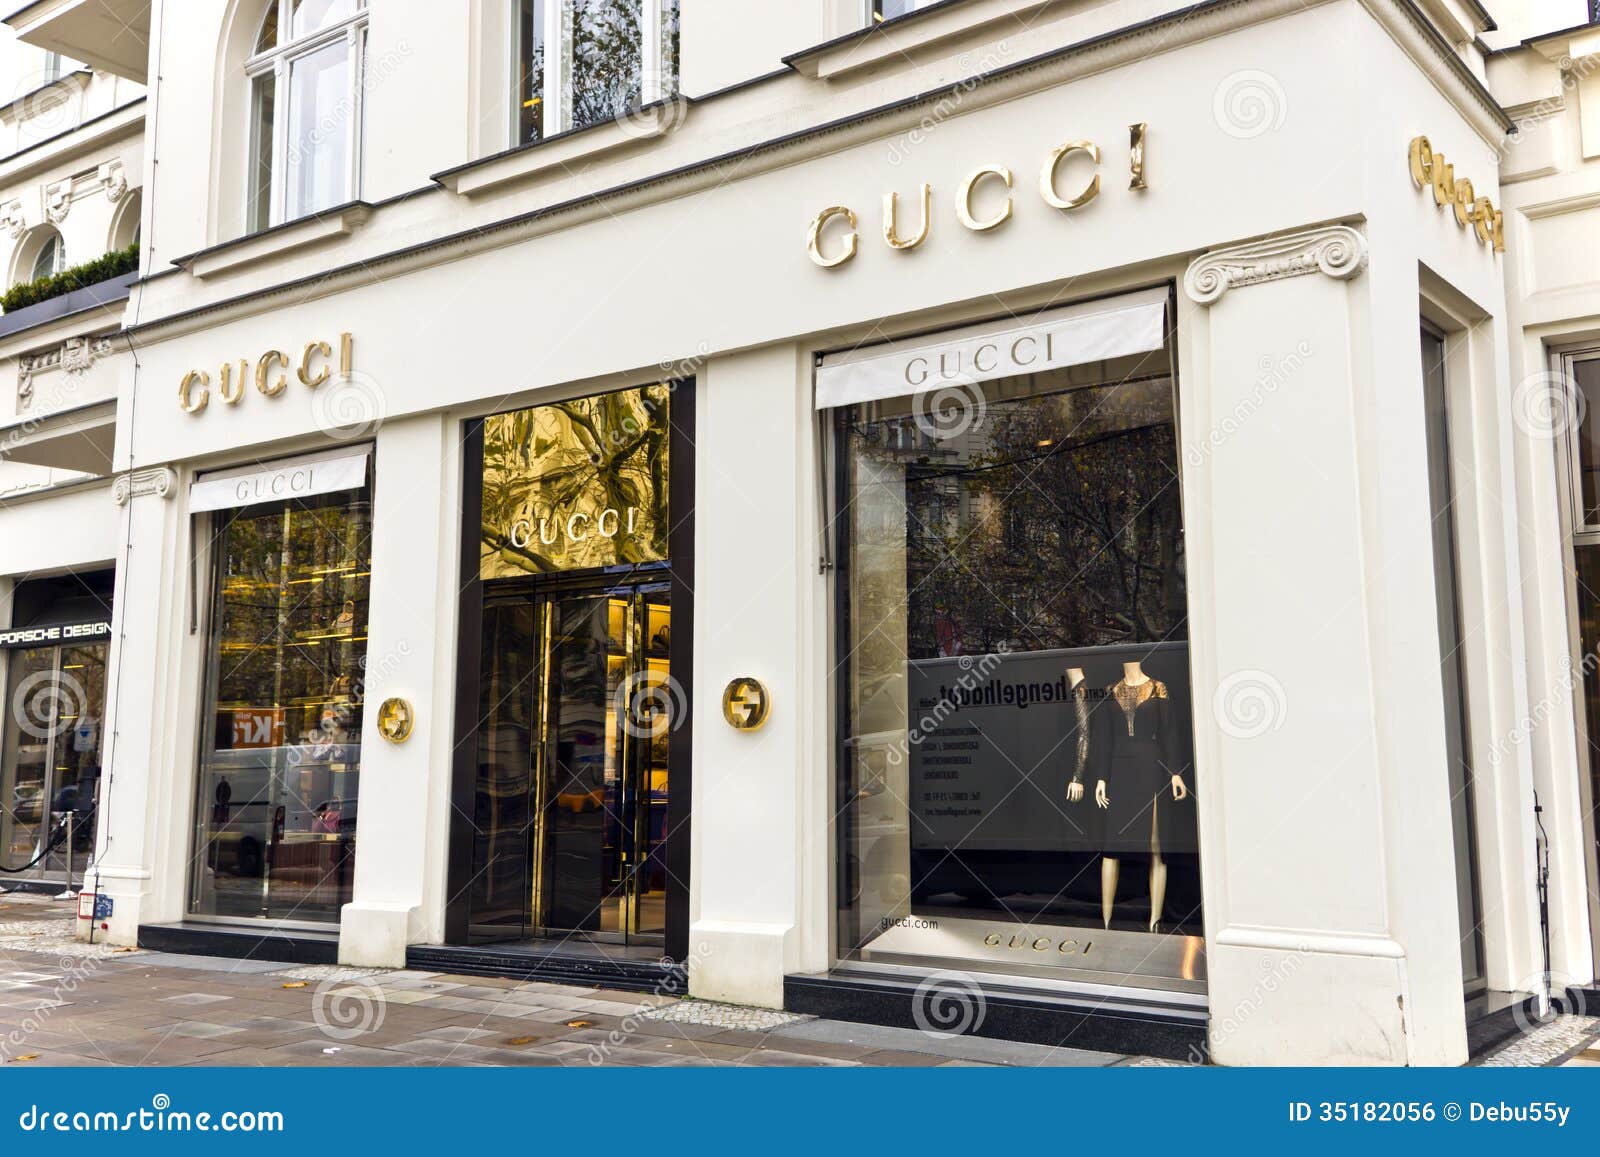 mental guide Snavs Gucci Store in Berlin, Germany. Editorial Photo - Image of gucci, designer:  35182056